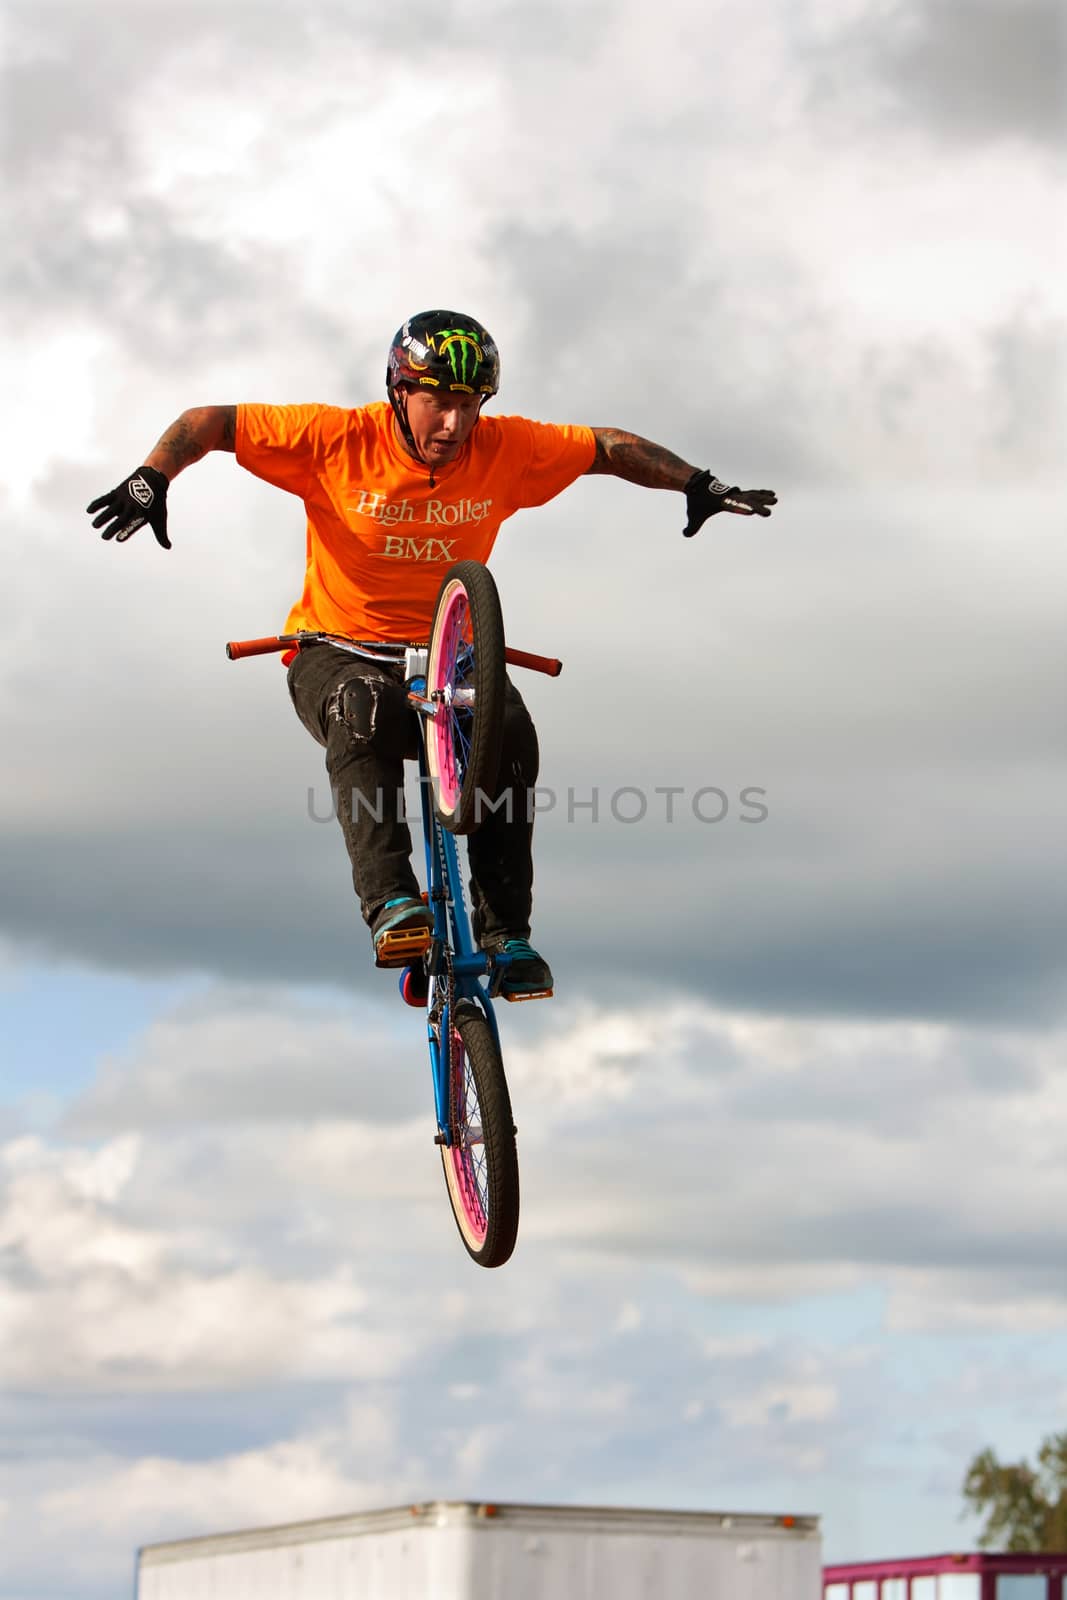 Hampton, GA, USA - September 27, 2014:  A young man with the High Roller BMX club takes his hands off the handlebars while performing a midair BMX stunt at the Georgia State Fair.